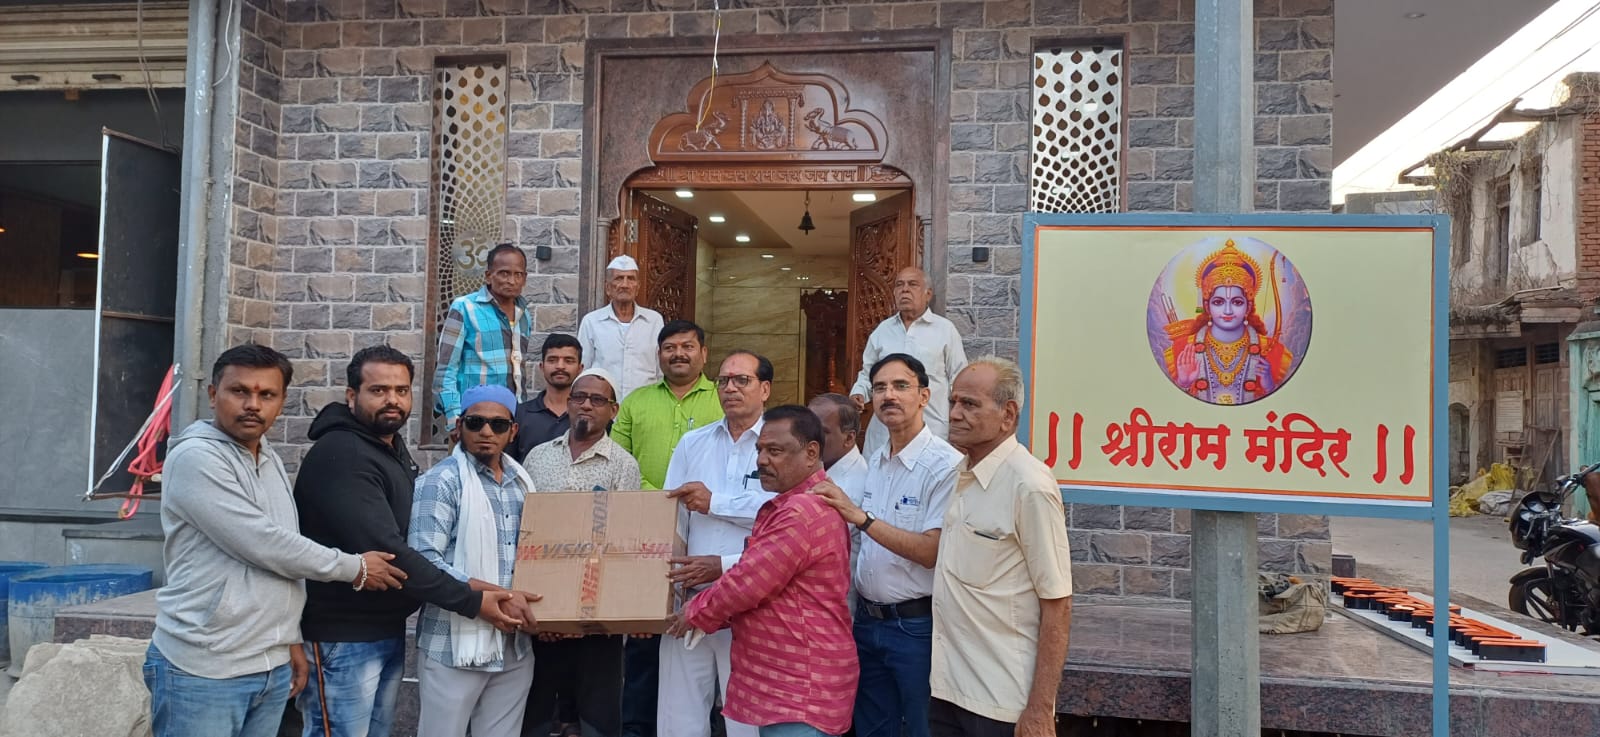 CCTV cameras gifted to Sri Ram temple in Karmala by Muslim brothers